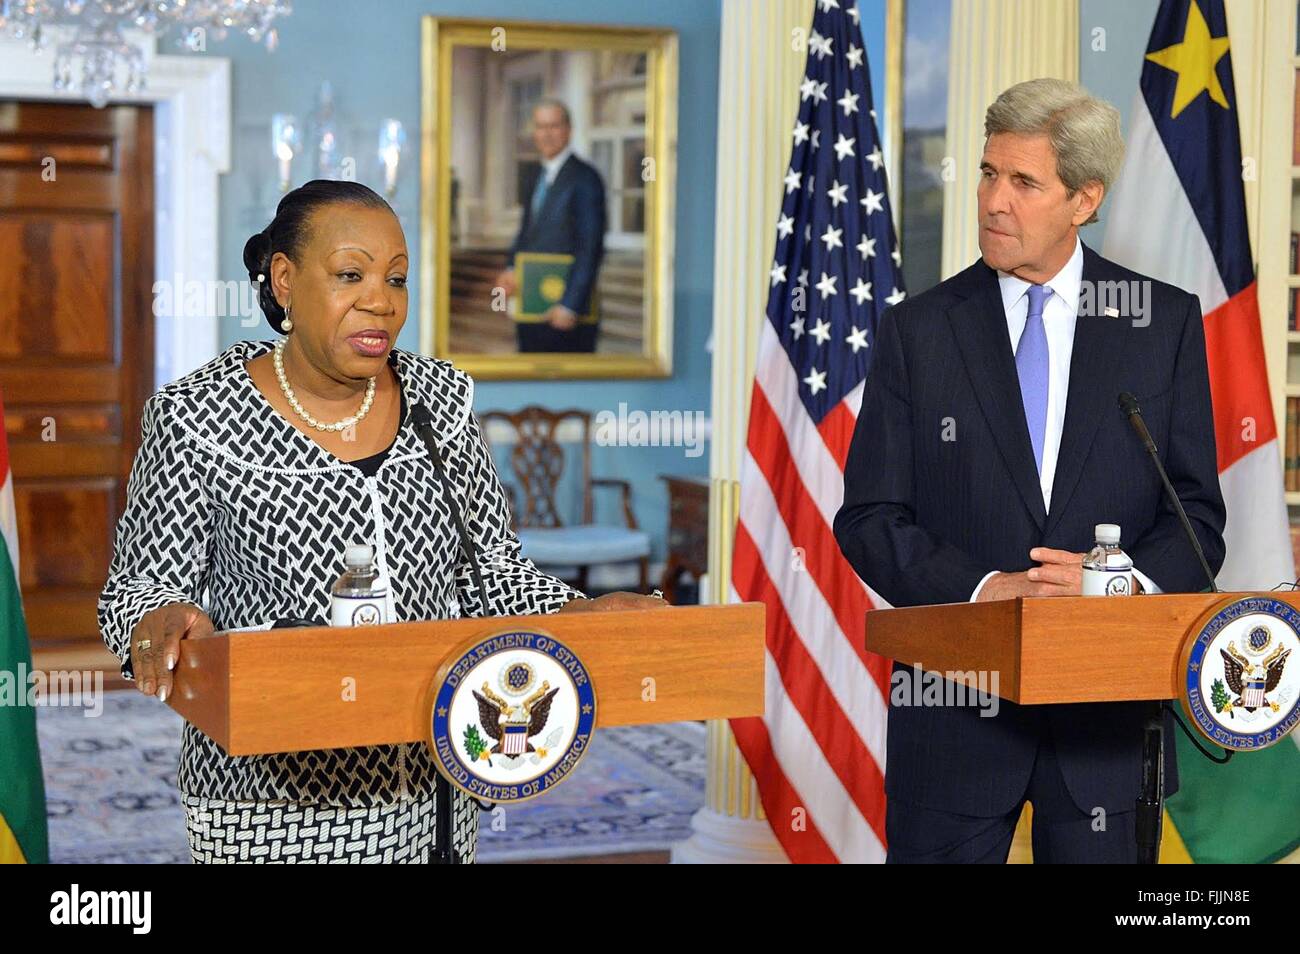 U.S Secretary of State John Kerry with Central African Republic Transitional President Catherine Samba-Panza during a joint press conference at the Department of State March 2, 2016 in Washington, D.C. Stock Photo